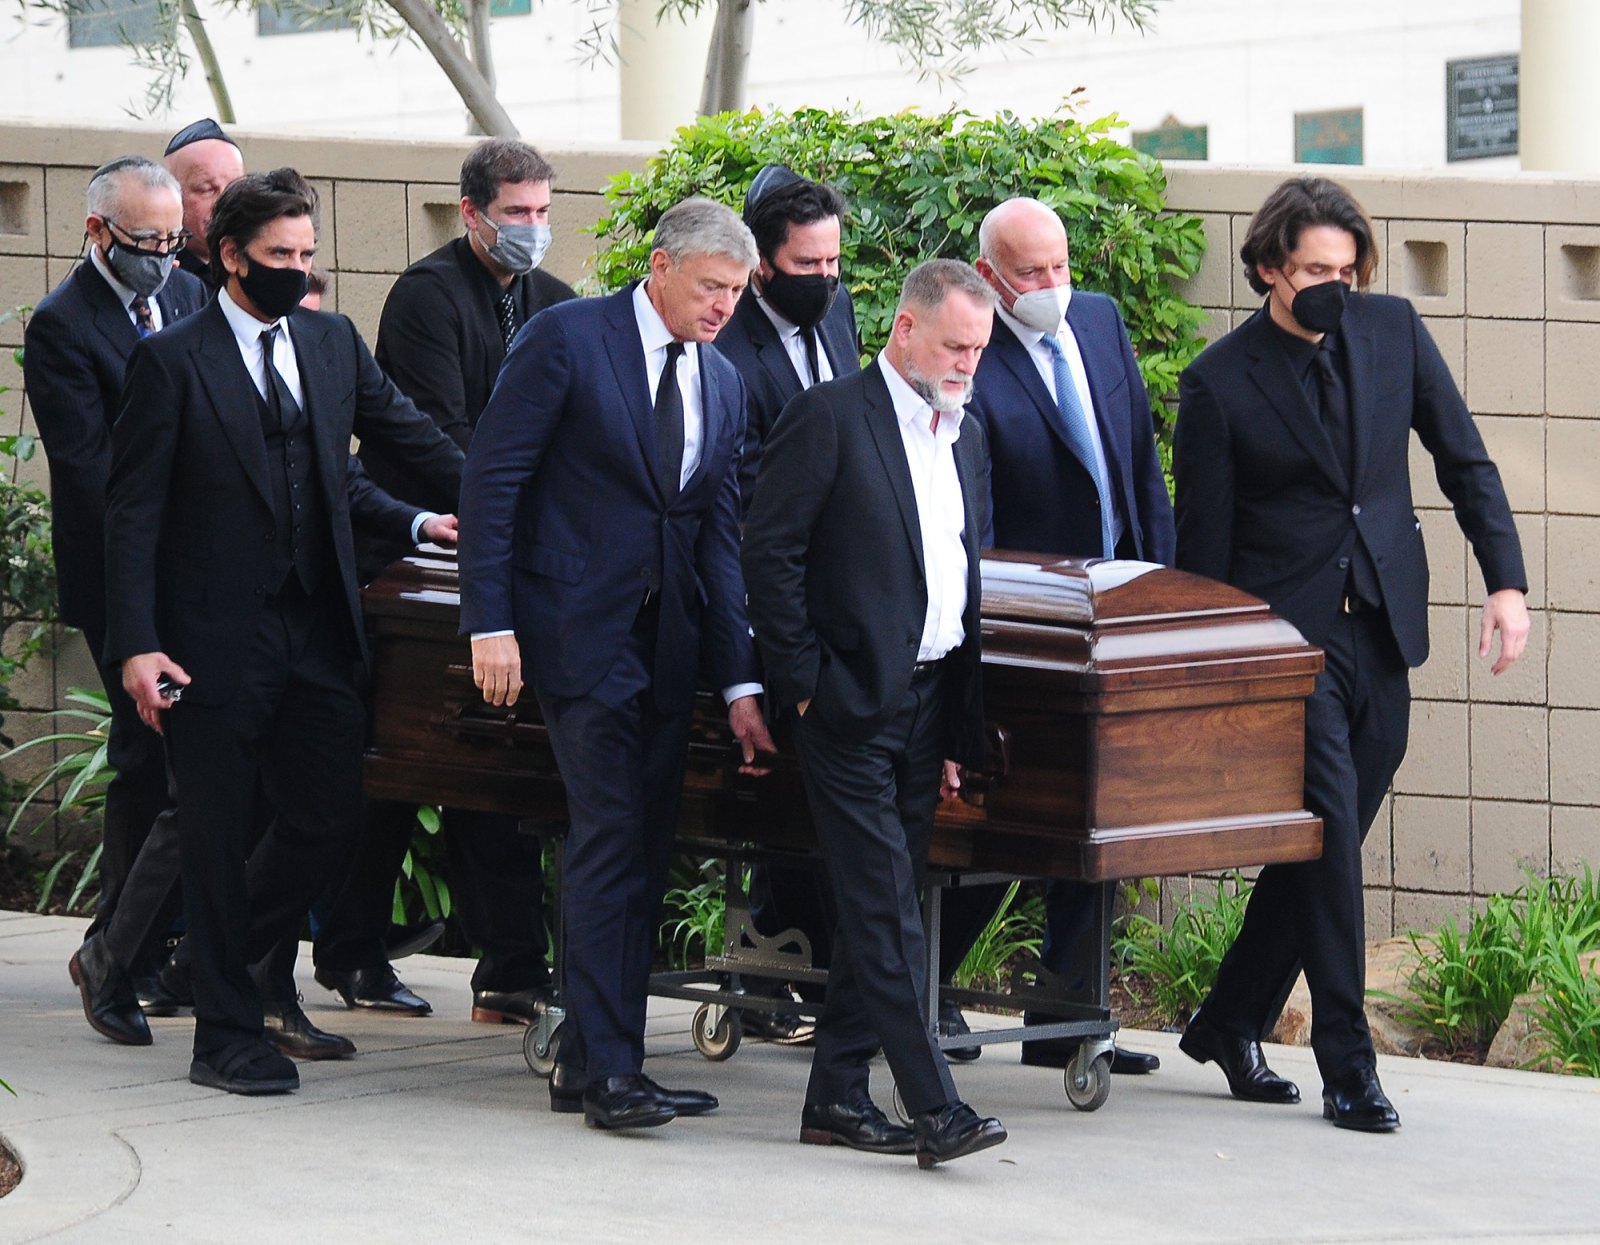 Bob Saget's Funeral Attended by 'Full House' Cast: Olsen Twins and More: 'It Was a Perfect Goodbye'